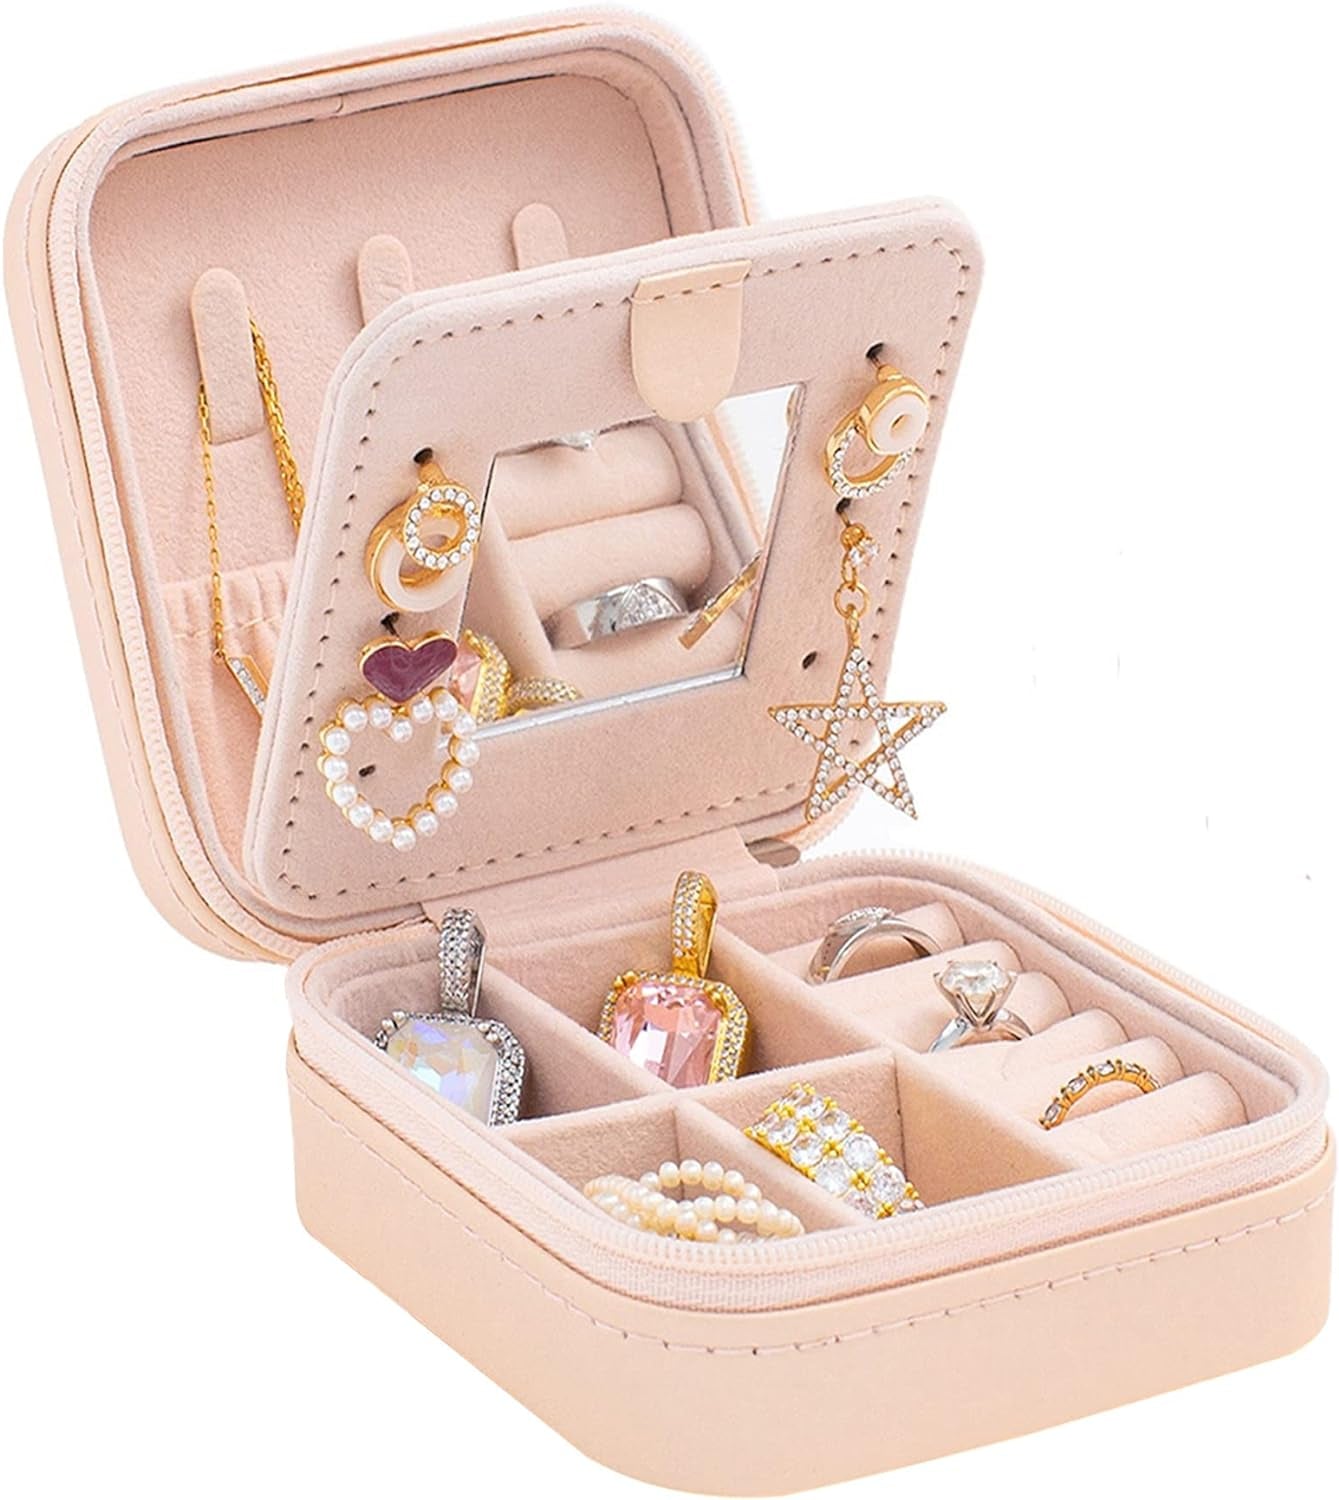 Chic and Compact: Pink Travel Jewelry Case with Mirror - The Ultimate Organizer for Girls and Women On the Go